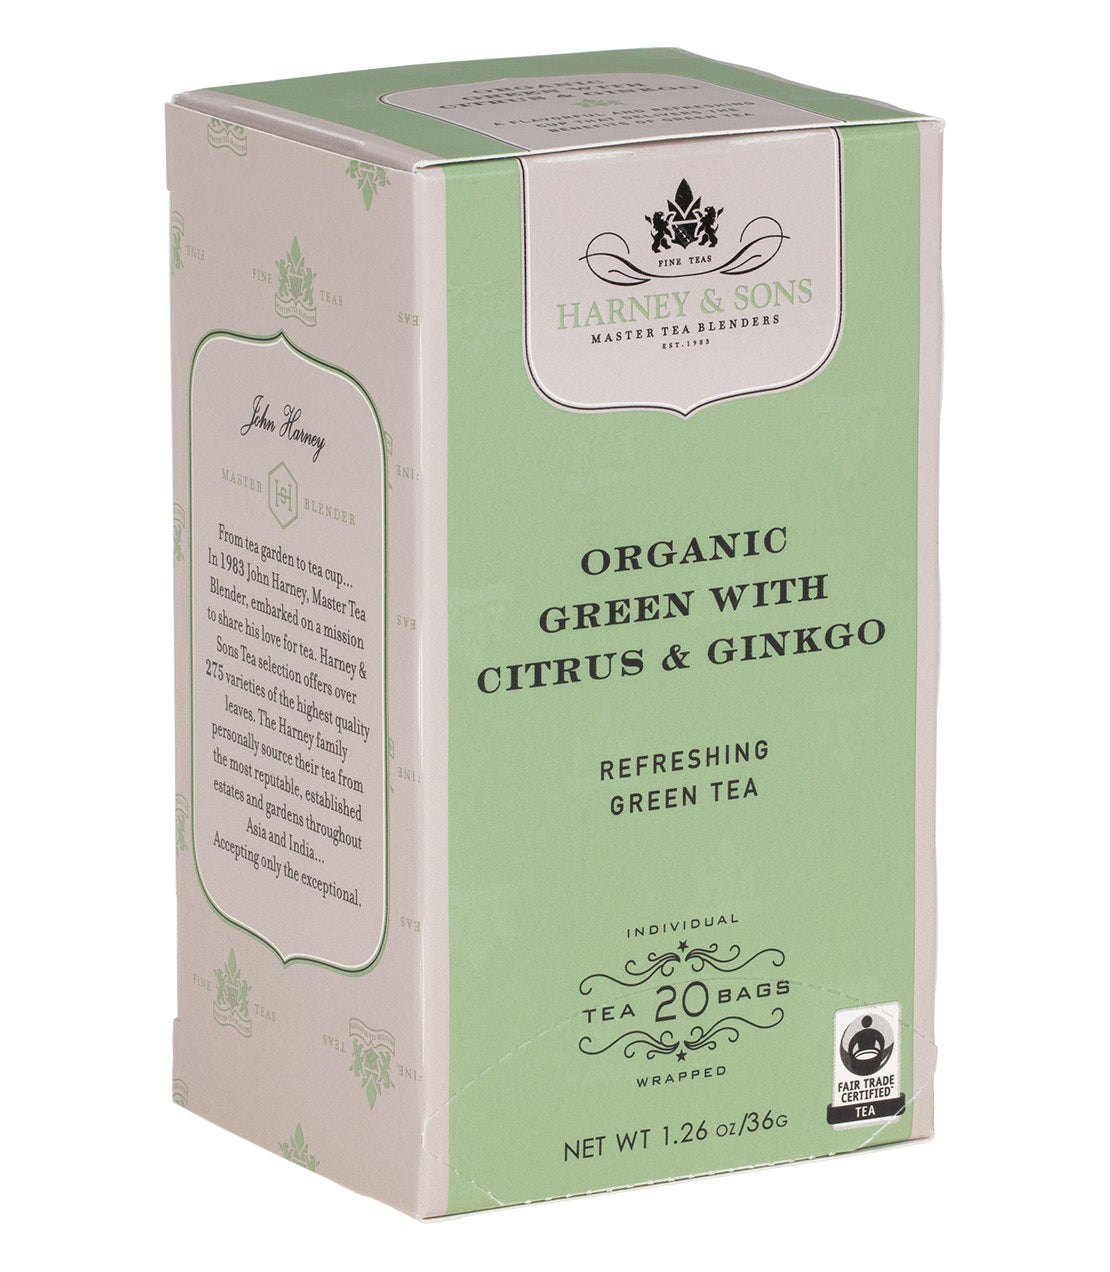 Organic Green with Citrus & Ginkgo - Teabags 20 CT Premium Teabags - Harney & Sons Fine Teas